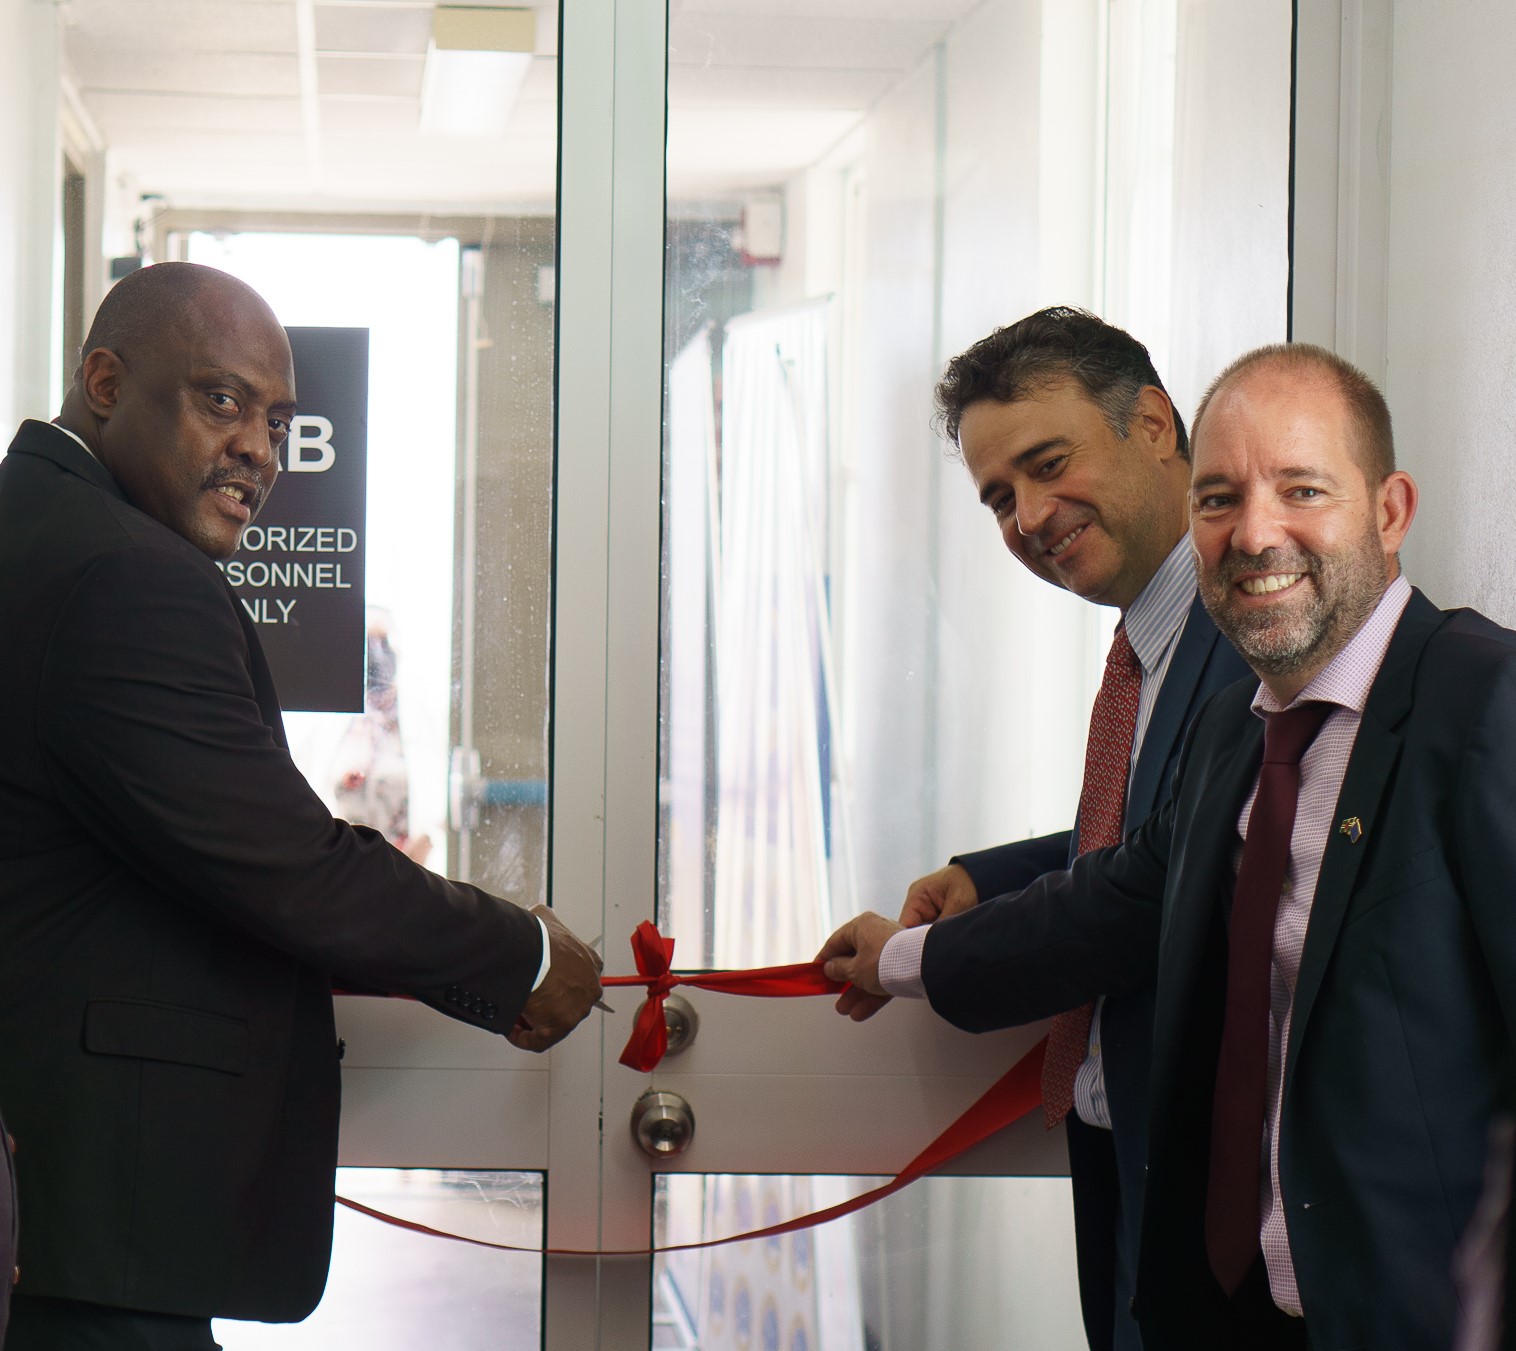 Dominica's Minister for Trade, Commerce, Innovation, Entrepreneurship and Business Development, the Honourable Ian Douglas; Head of CDB’s Private Sector Unit, Mr. Miguel Almeyda; and  Mr. David Mogollon, Head of Cooperation for the EU Delegation to Barbados, the Eastern Caribbean States, the OECS, and CARICOM/CARIFORUM cut the ribbon during the ceremony to commission lab upgrades at the Dominica Bureau of Standards